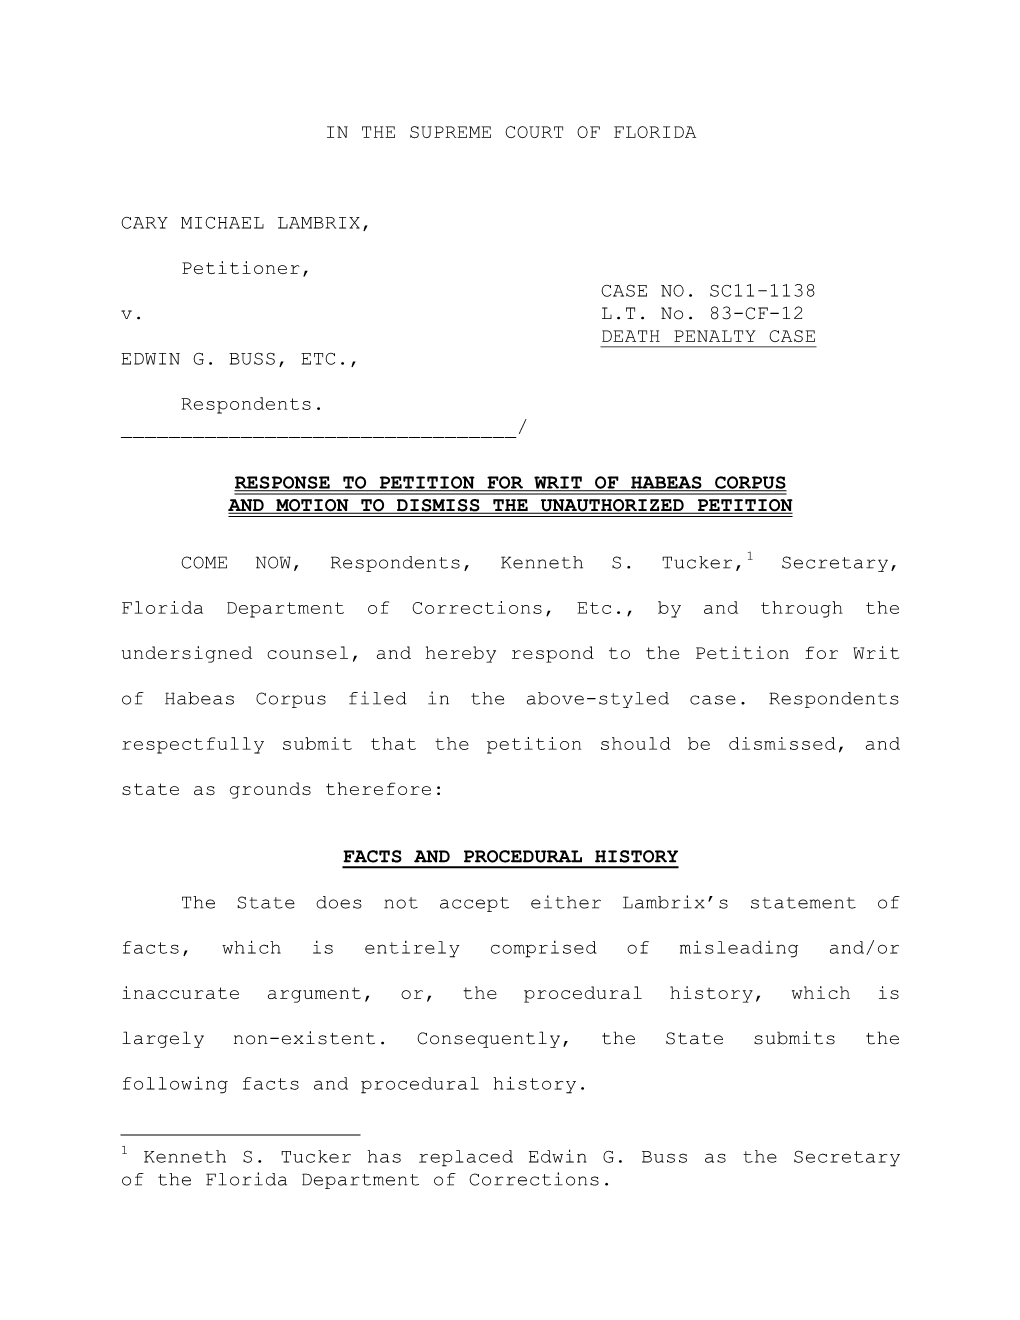 Response to Petition for Writ of Habeas Corpus and Motion to Dismiss the Unauthorized Petition